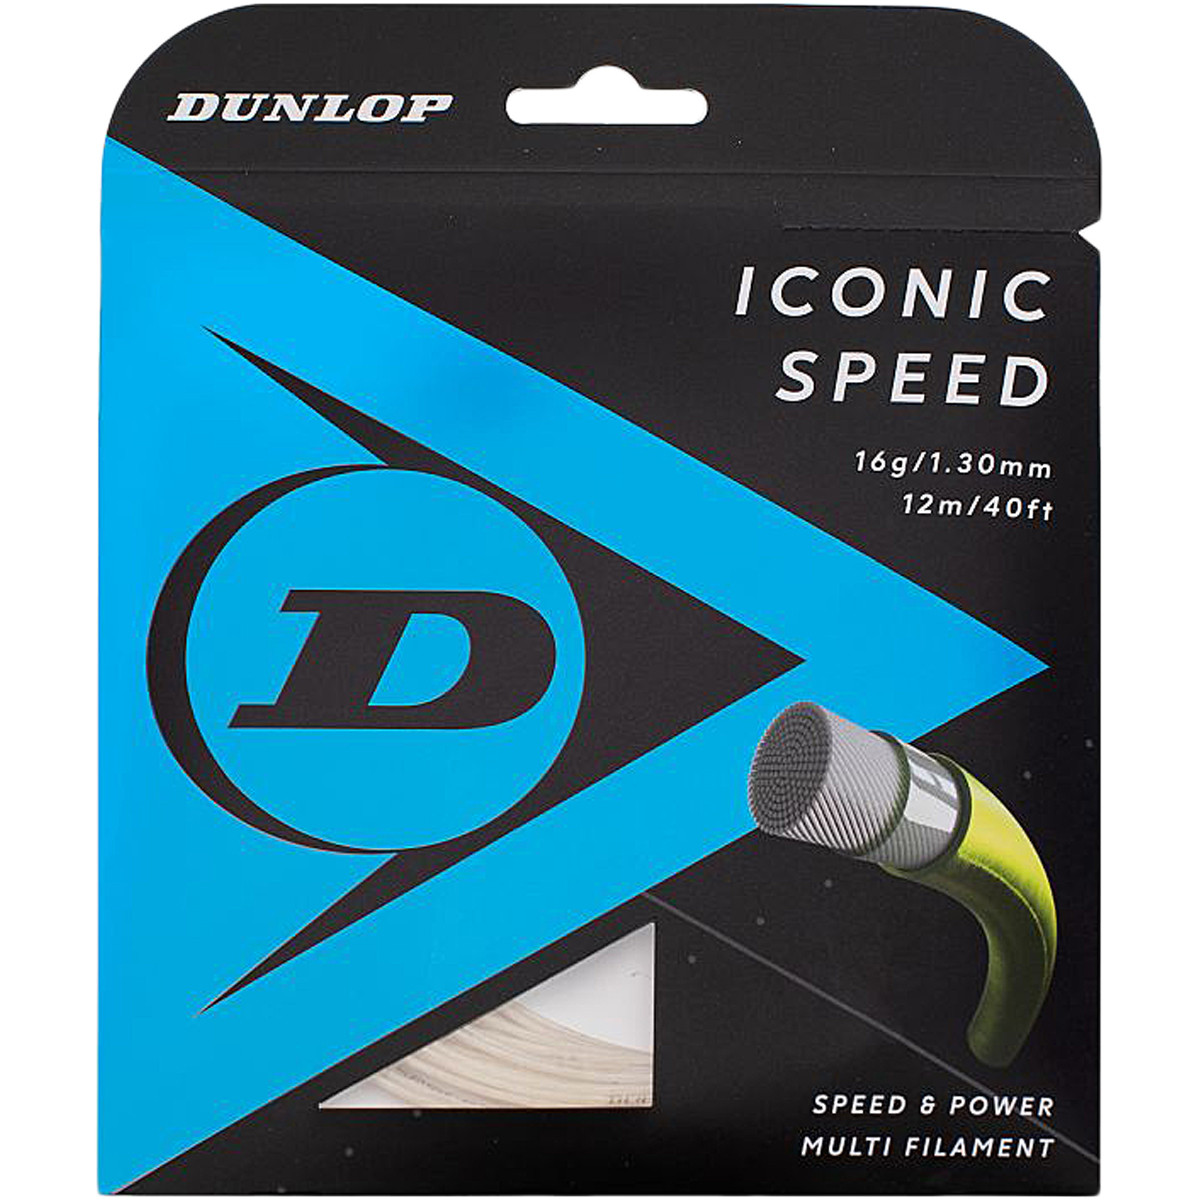 DUNLOP ICONIC SPEED PACK (12 METERS)